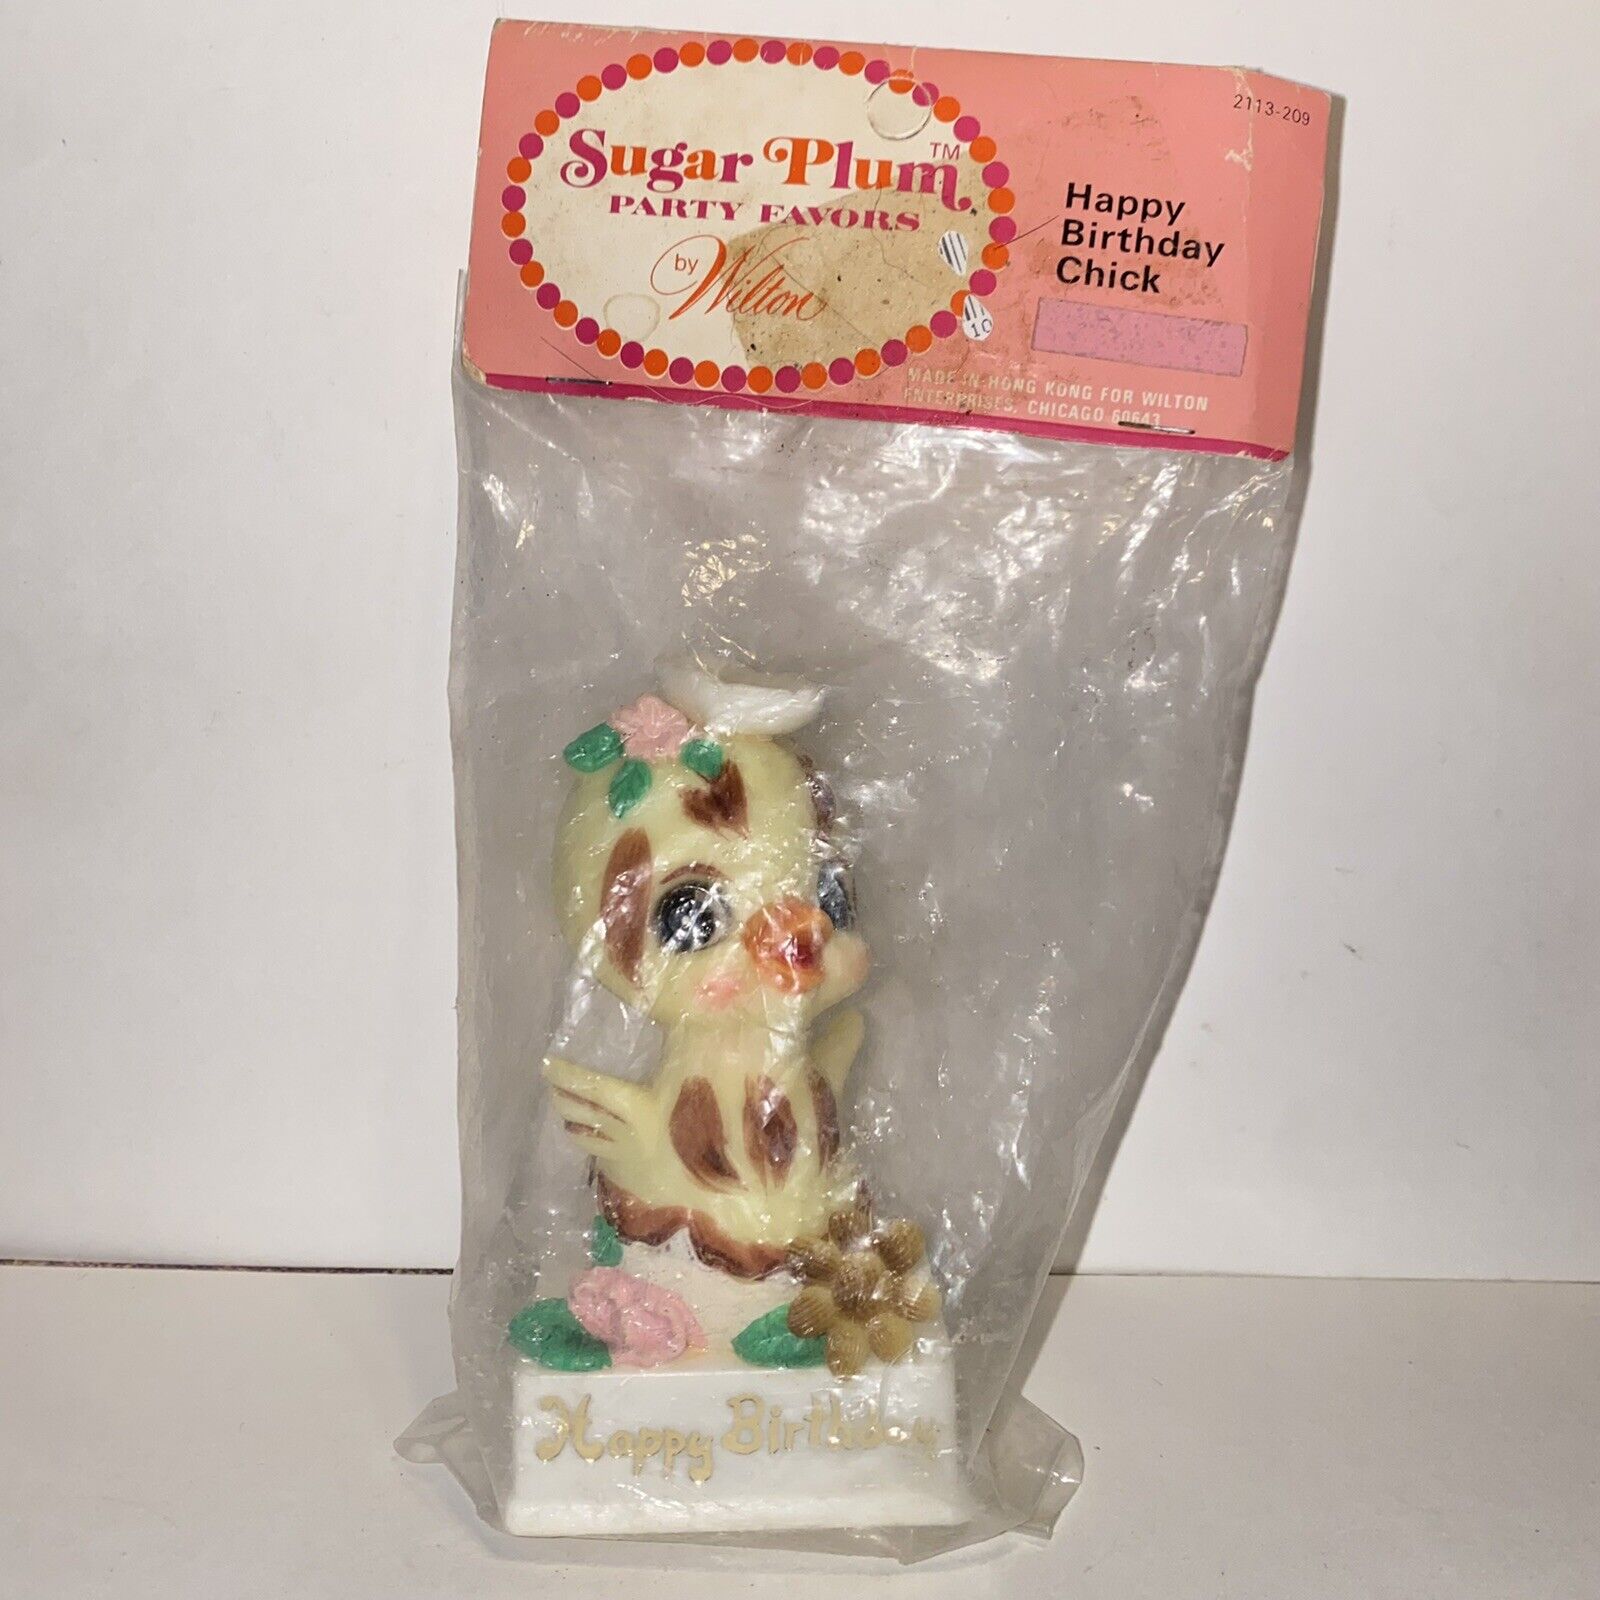 Vintage Sugar Plum Party Favors by Wilton Happy Birthday Chick Cake Topper